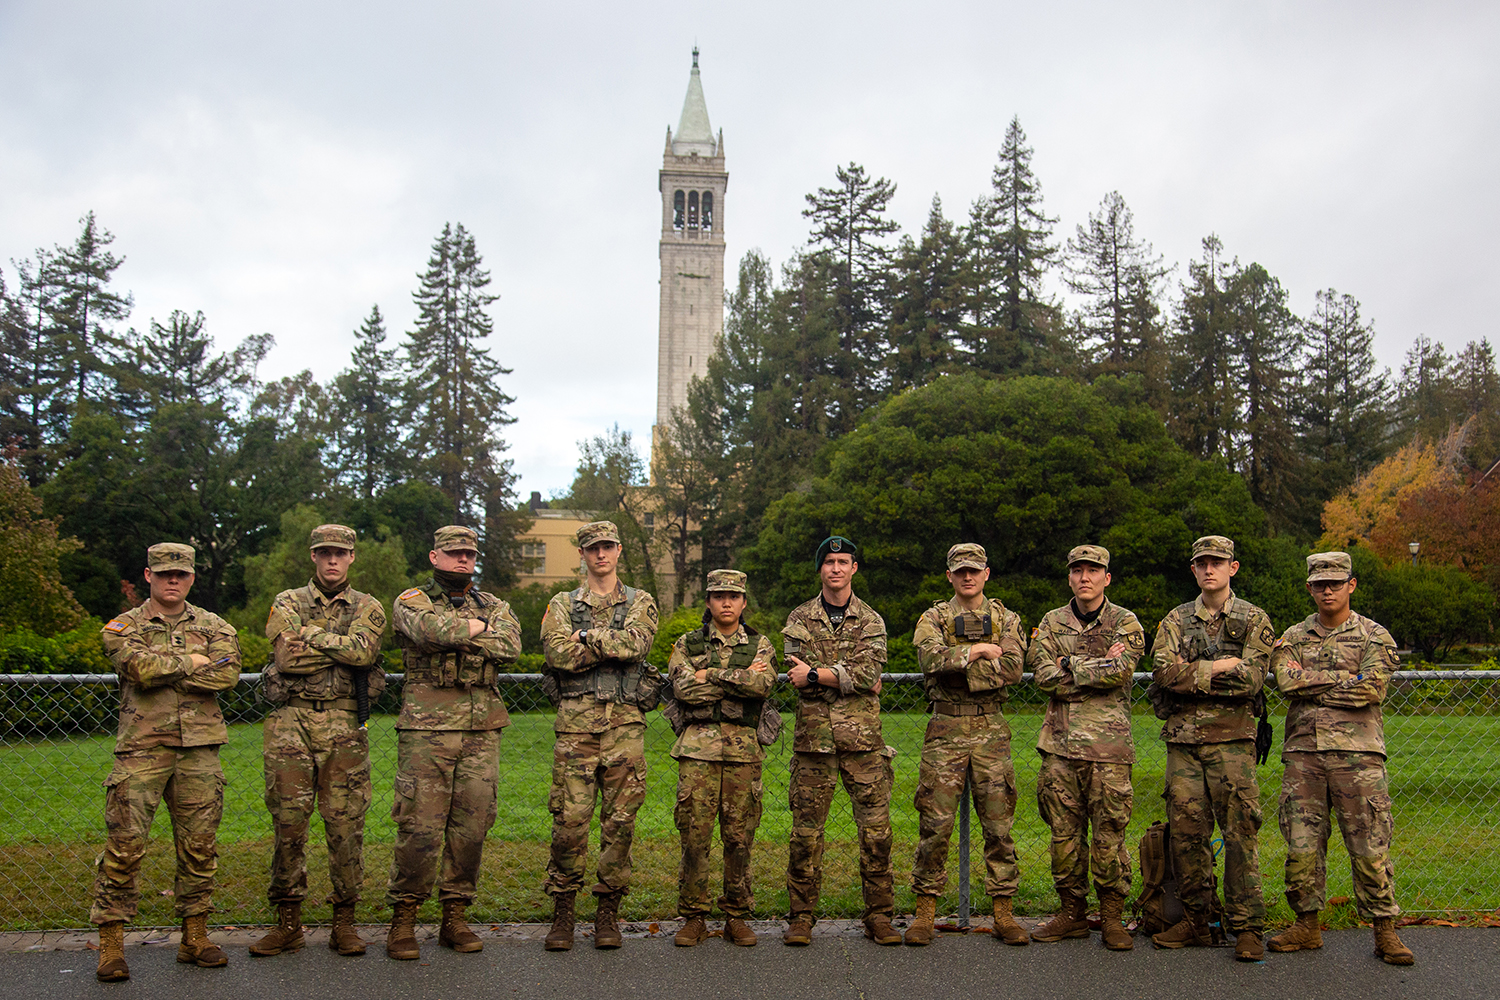 Berkeley ROTC cadets pose in front of the Campanile